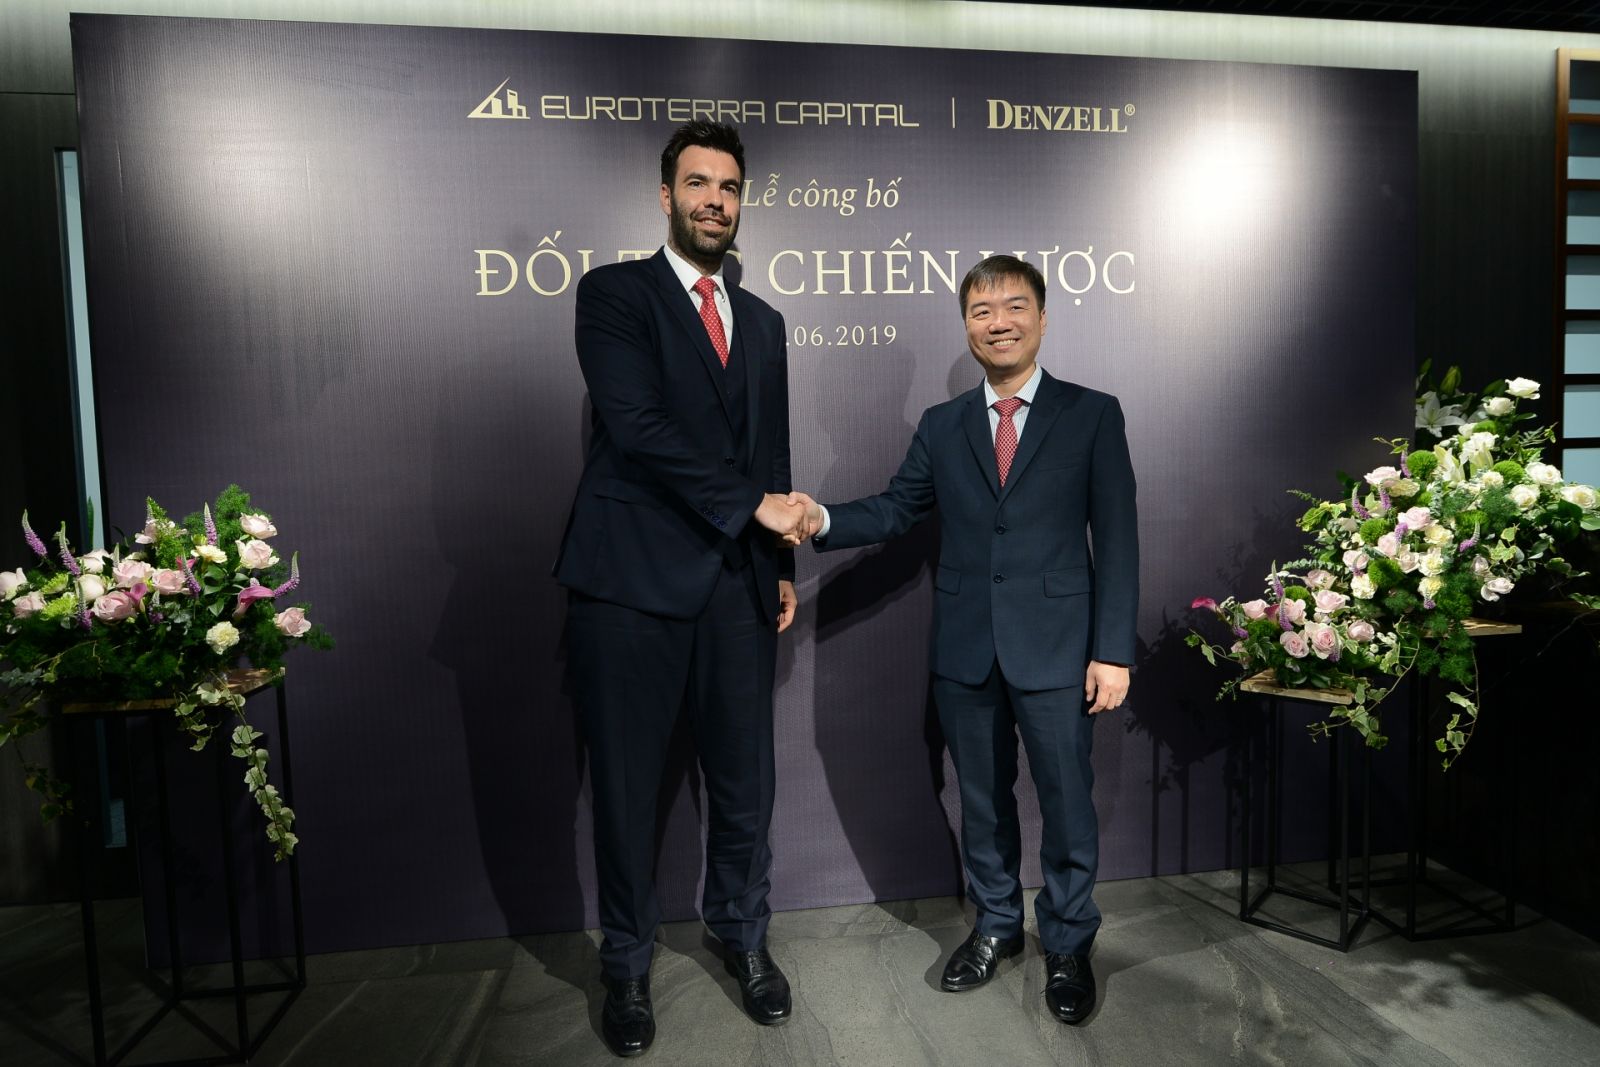 Euroterra Capital shakes hands with Denzell to introduce prime development projects in Greece to Vietnam-based investors.